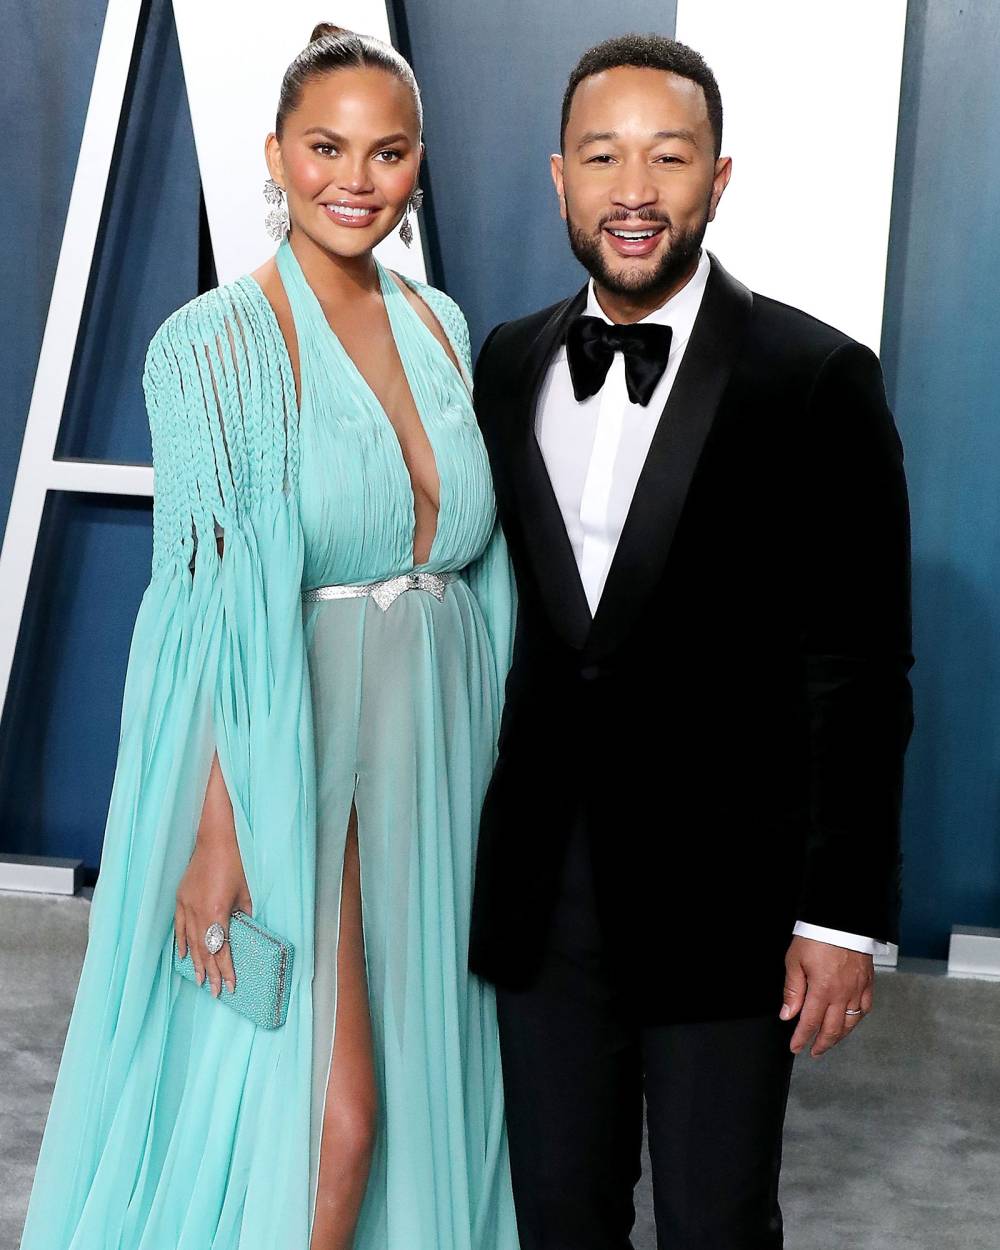 Chrissy Teigen and John Legend Are Confident and Optimistic About IVF Journey